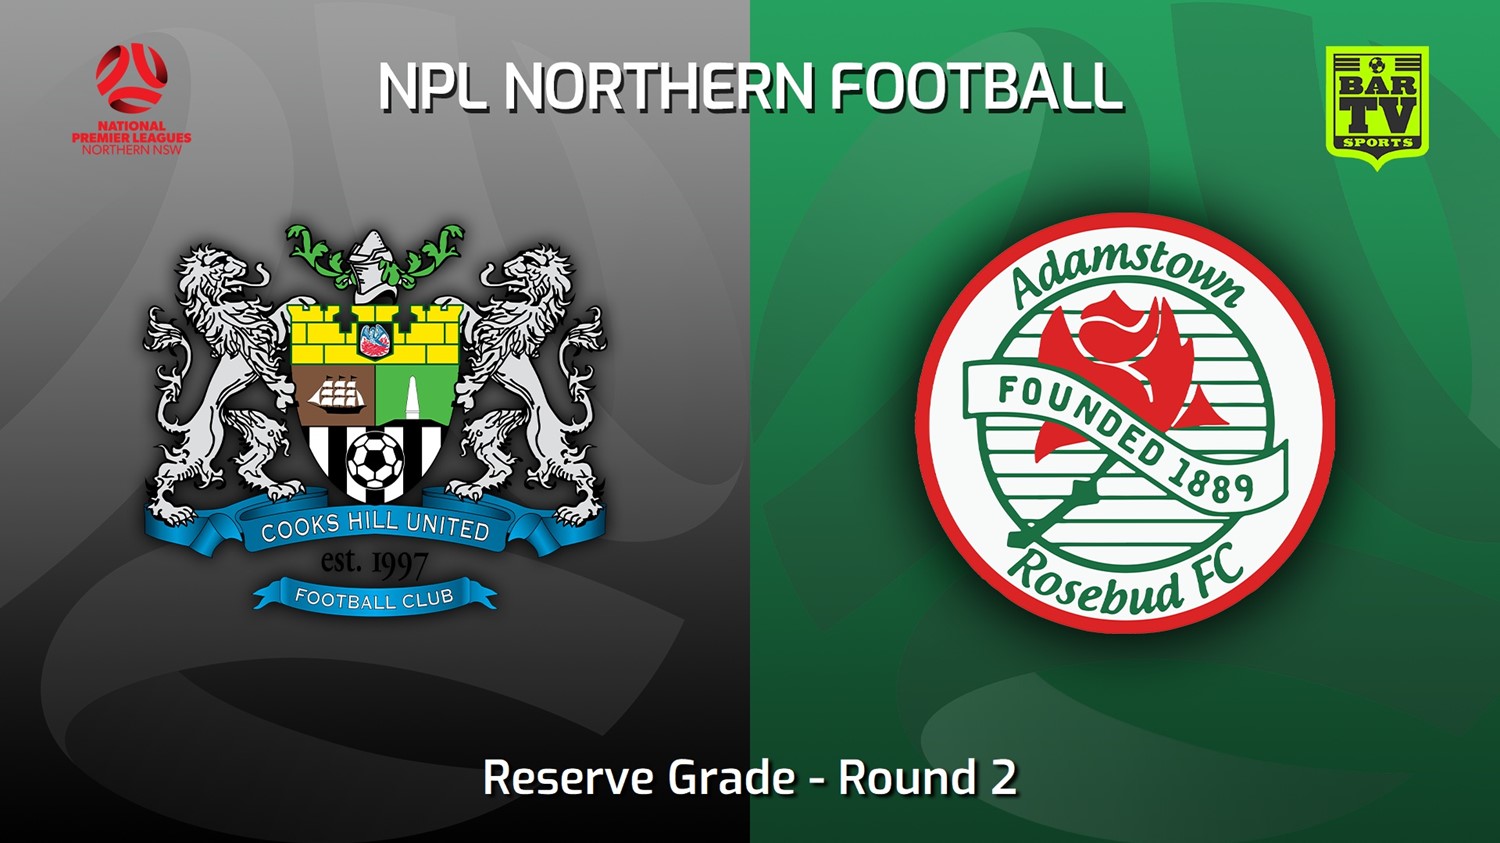 230311-NNSW NPLM Res Round 2 - Cooks Hill United FC (Res) v Adamstown Rosebud FC Res Minigame Slate Image